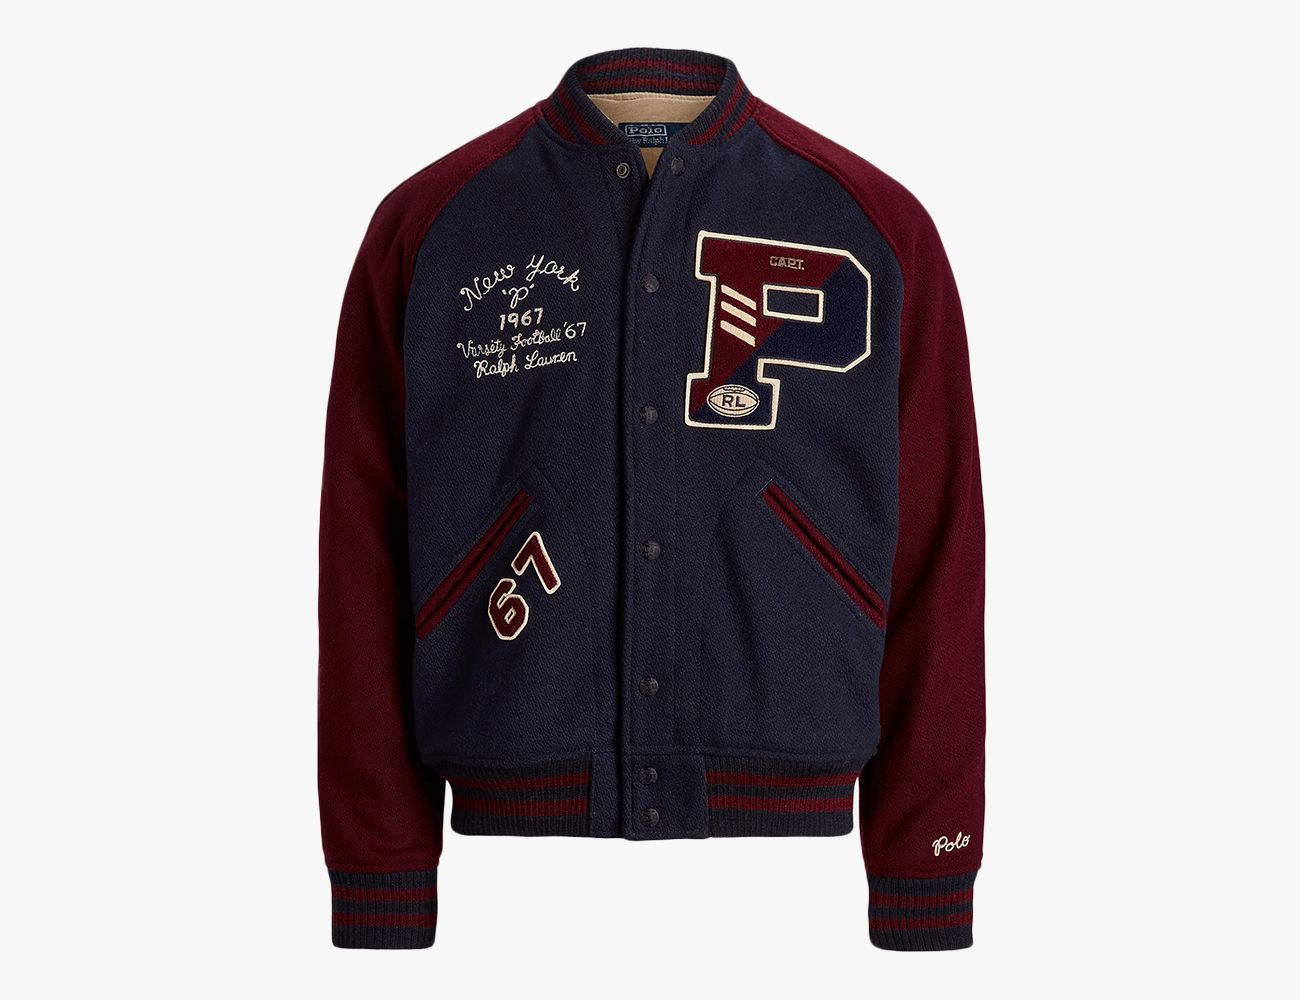 Varsity Jackets are (again) in fashion this winter. – Gentsome